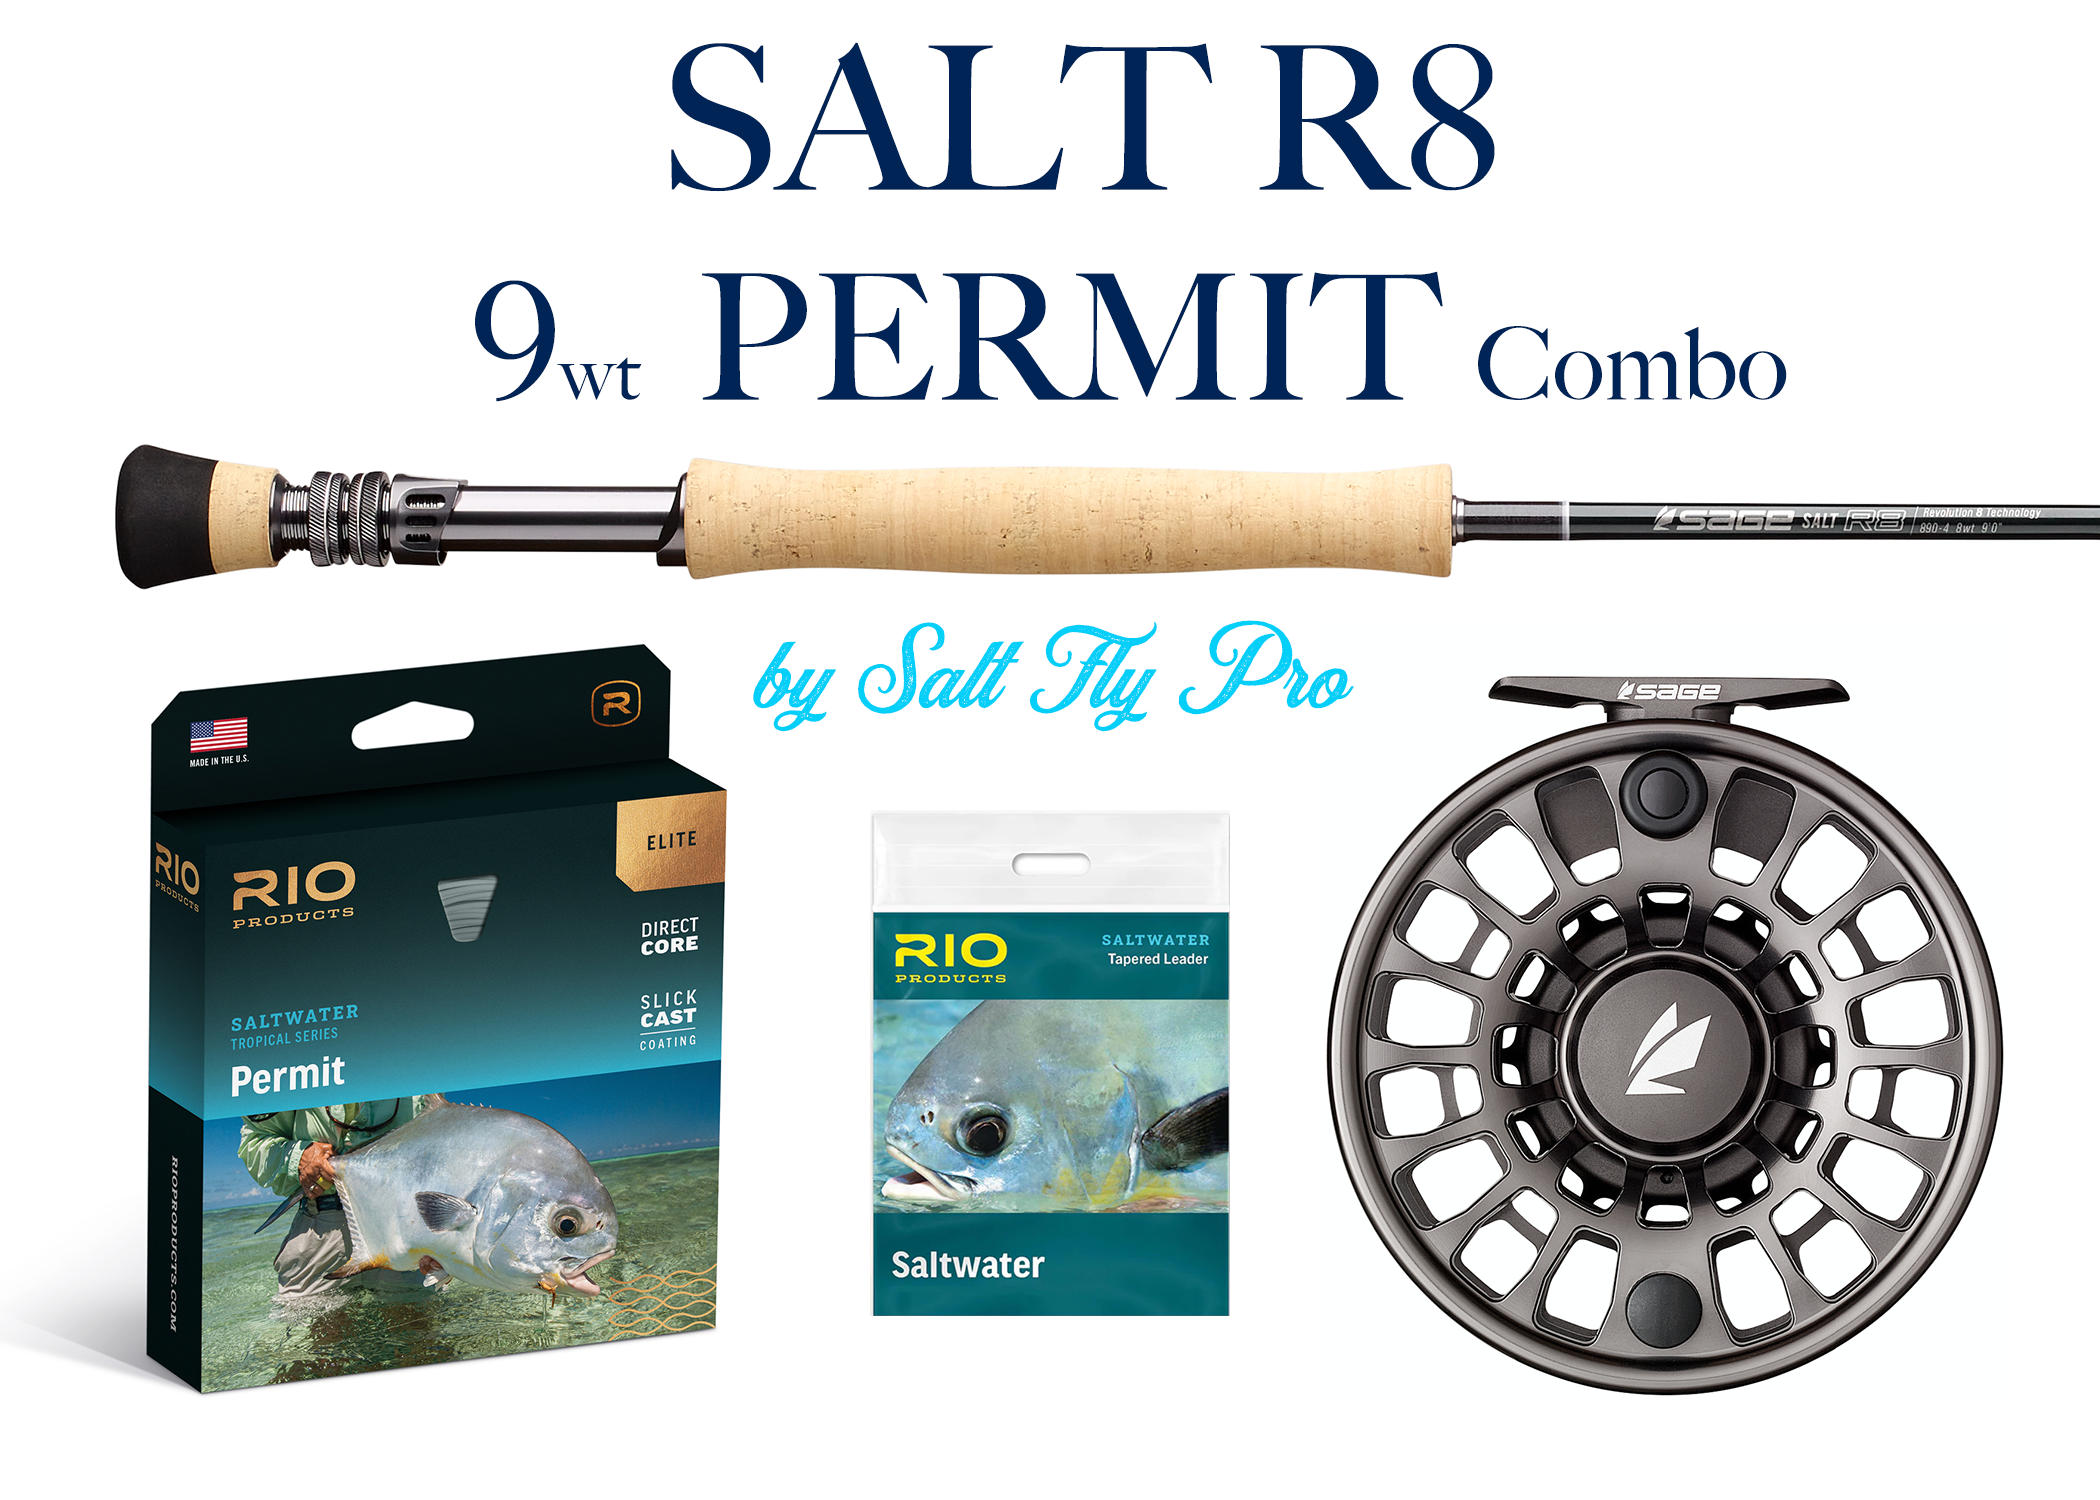 Sage SALT R8 9wt PERMIT Saltwater Fly Rod Combo Outfit - NEW!